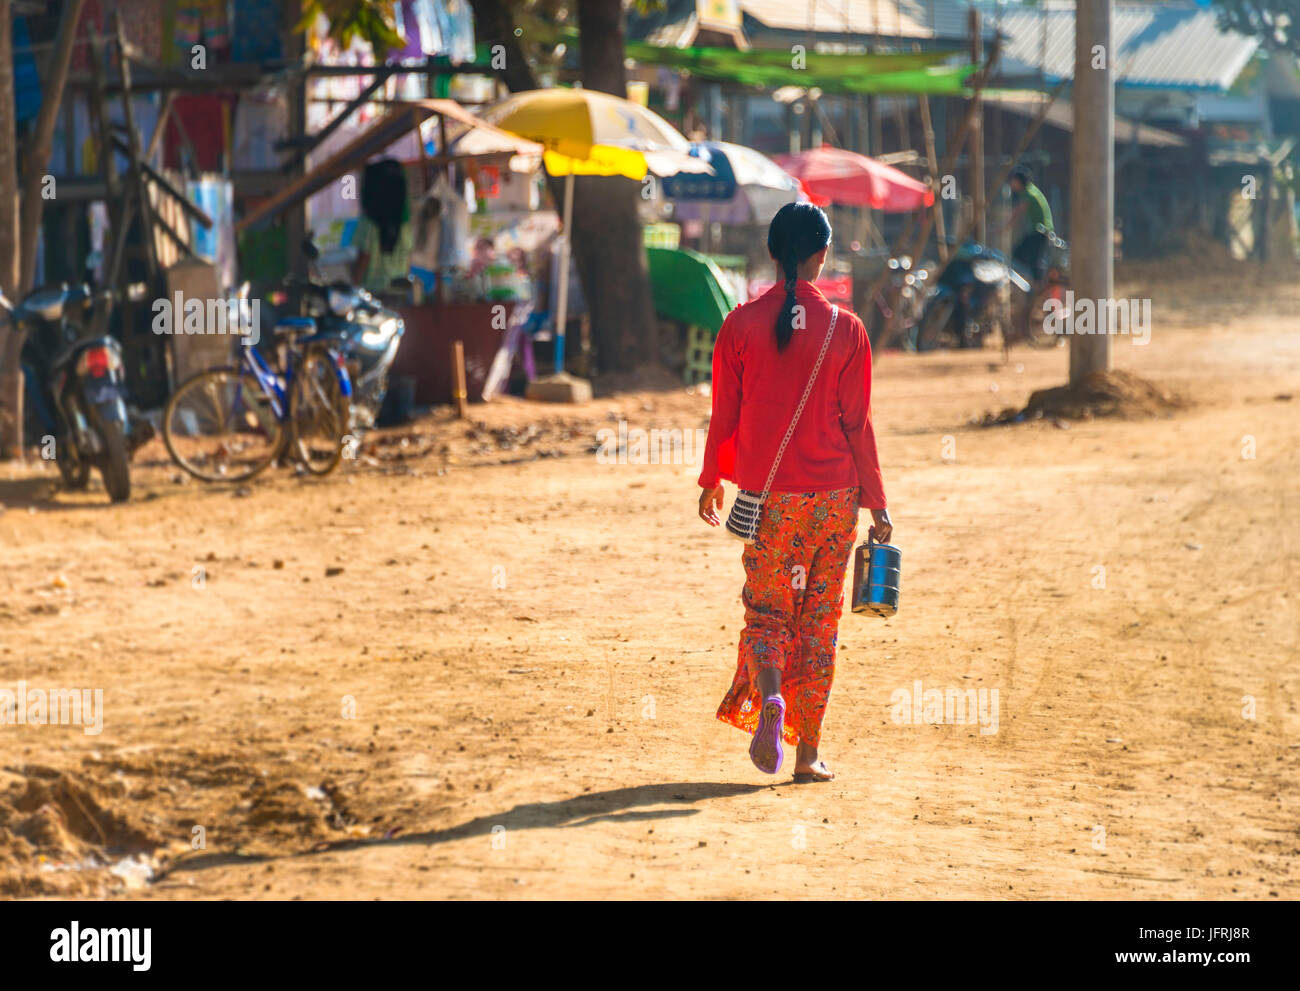 Young indigenous woman in colorful traditional robe walking, street scene, Chaung Tha Beach, Myanmar Stock Photo